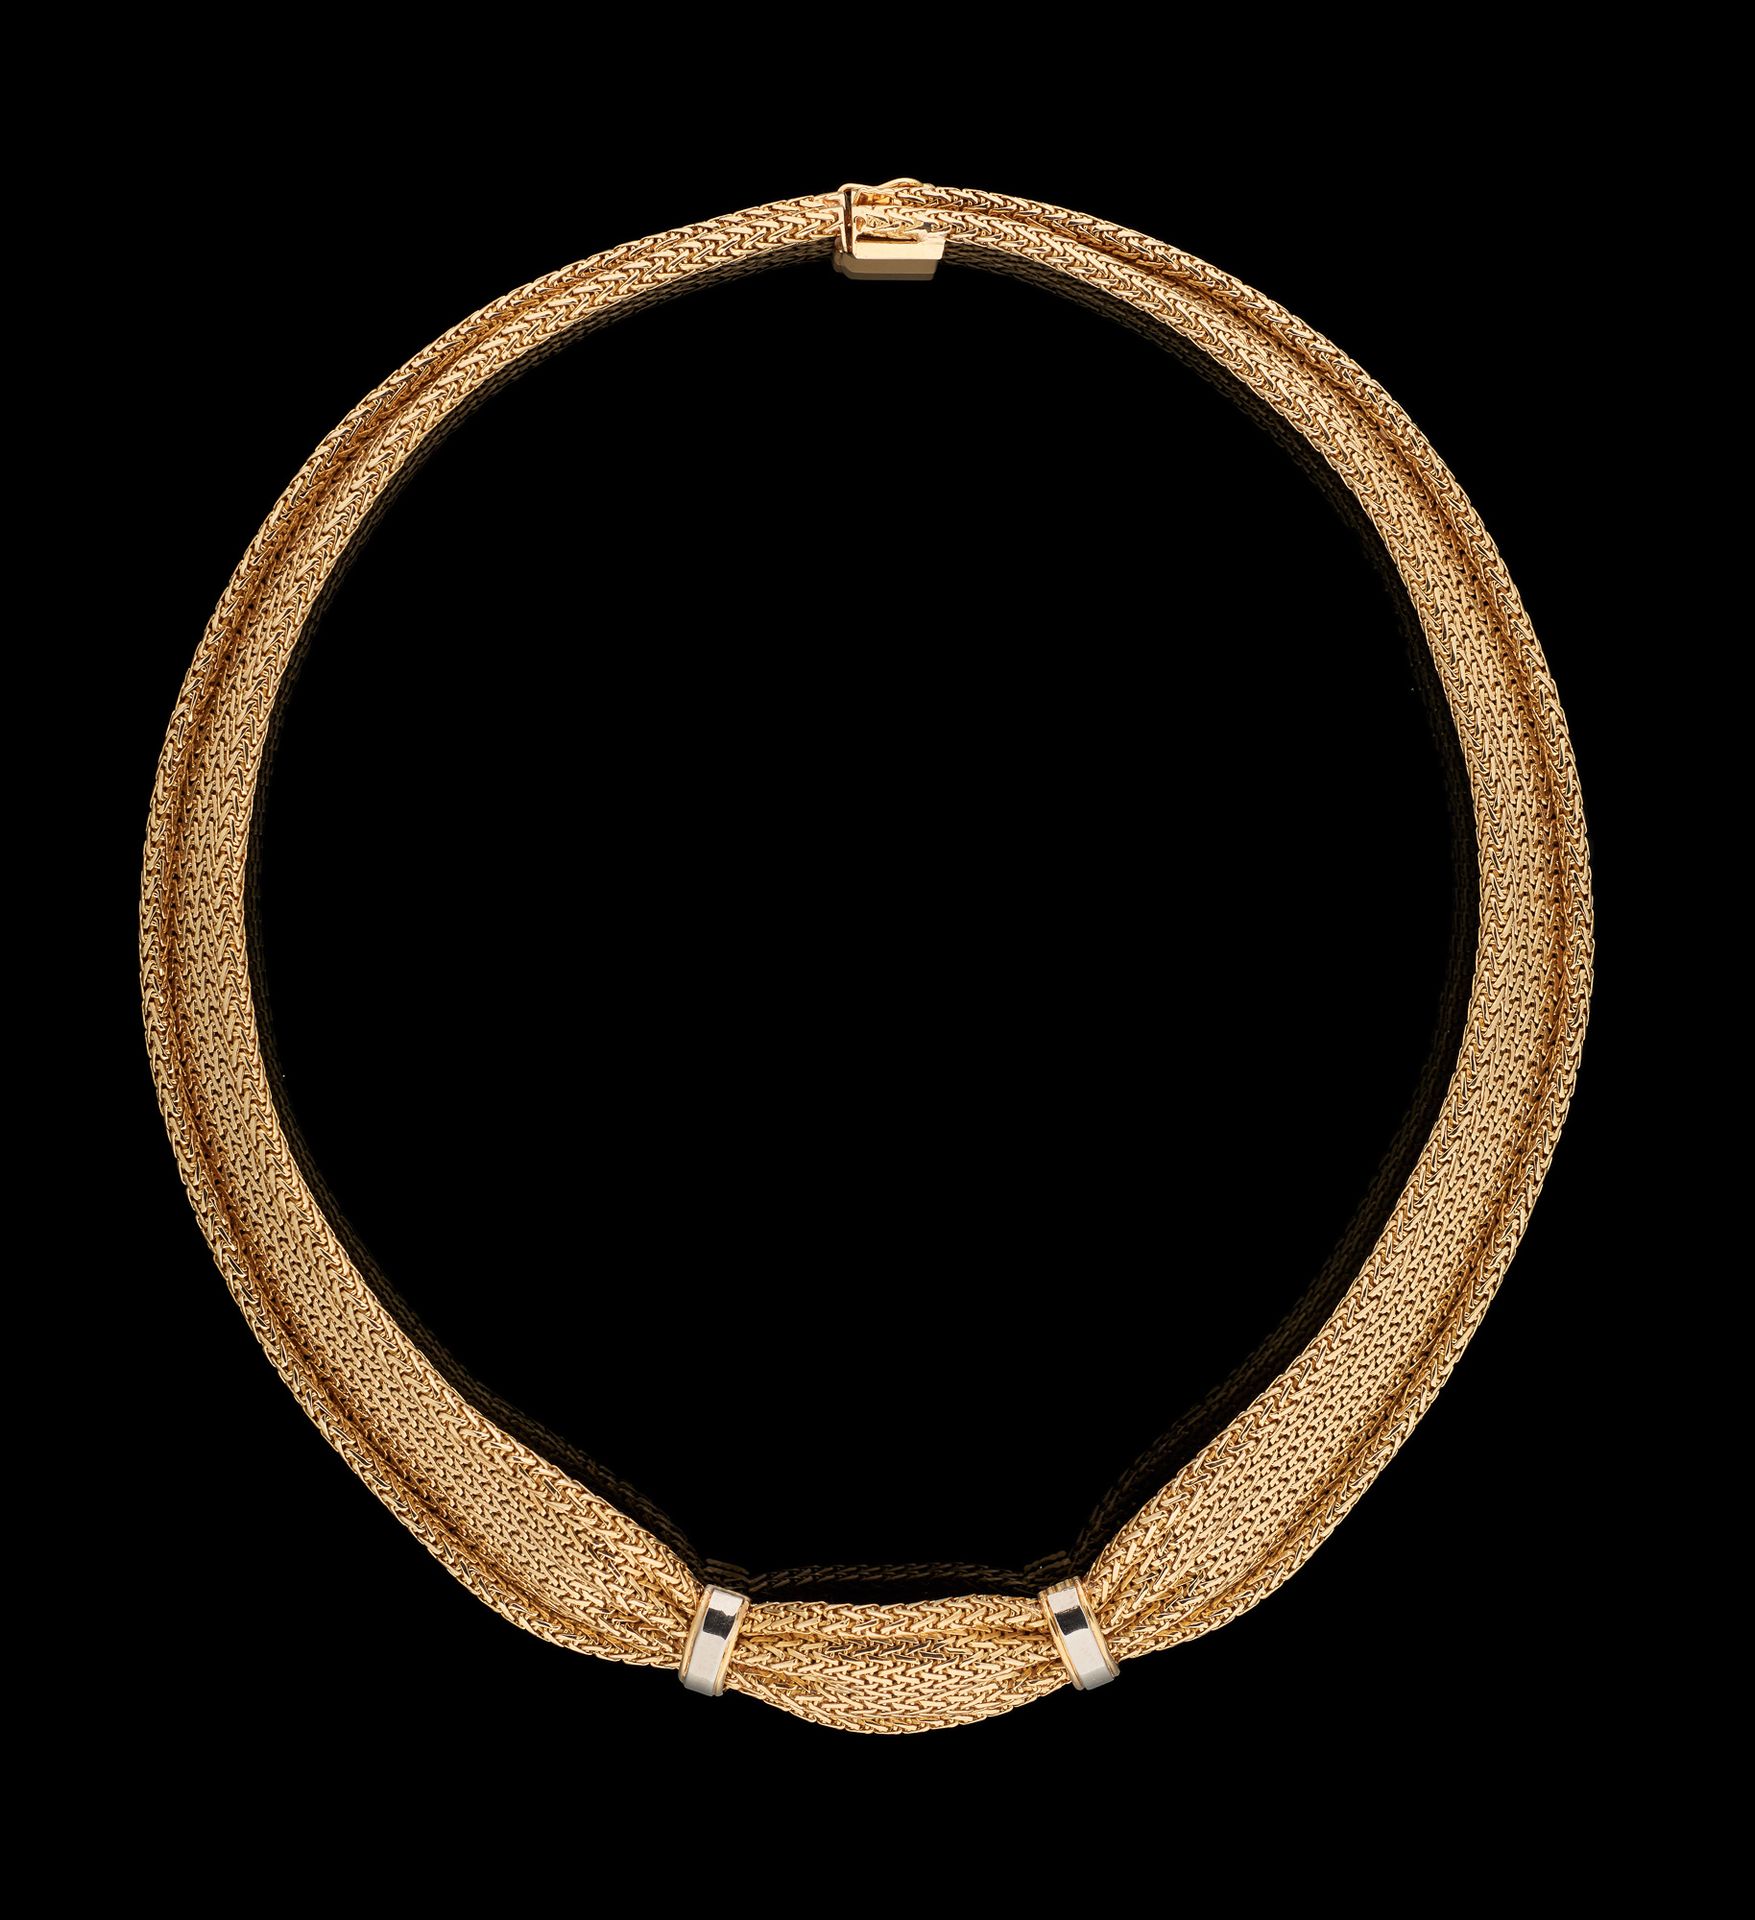 Circa 1950. Jewel: Necklace in yellow gold.

Gross weight: +/- 74 grams.